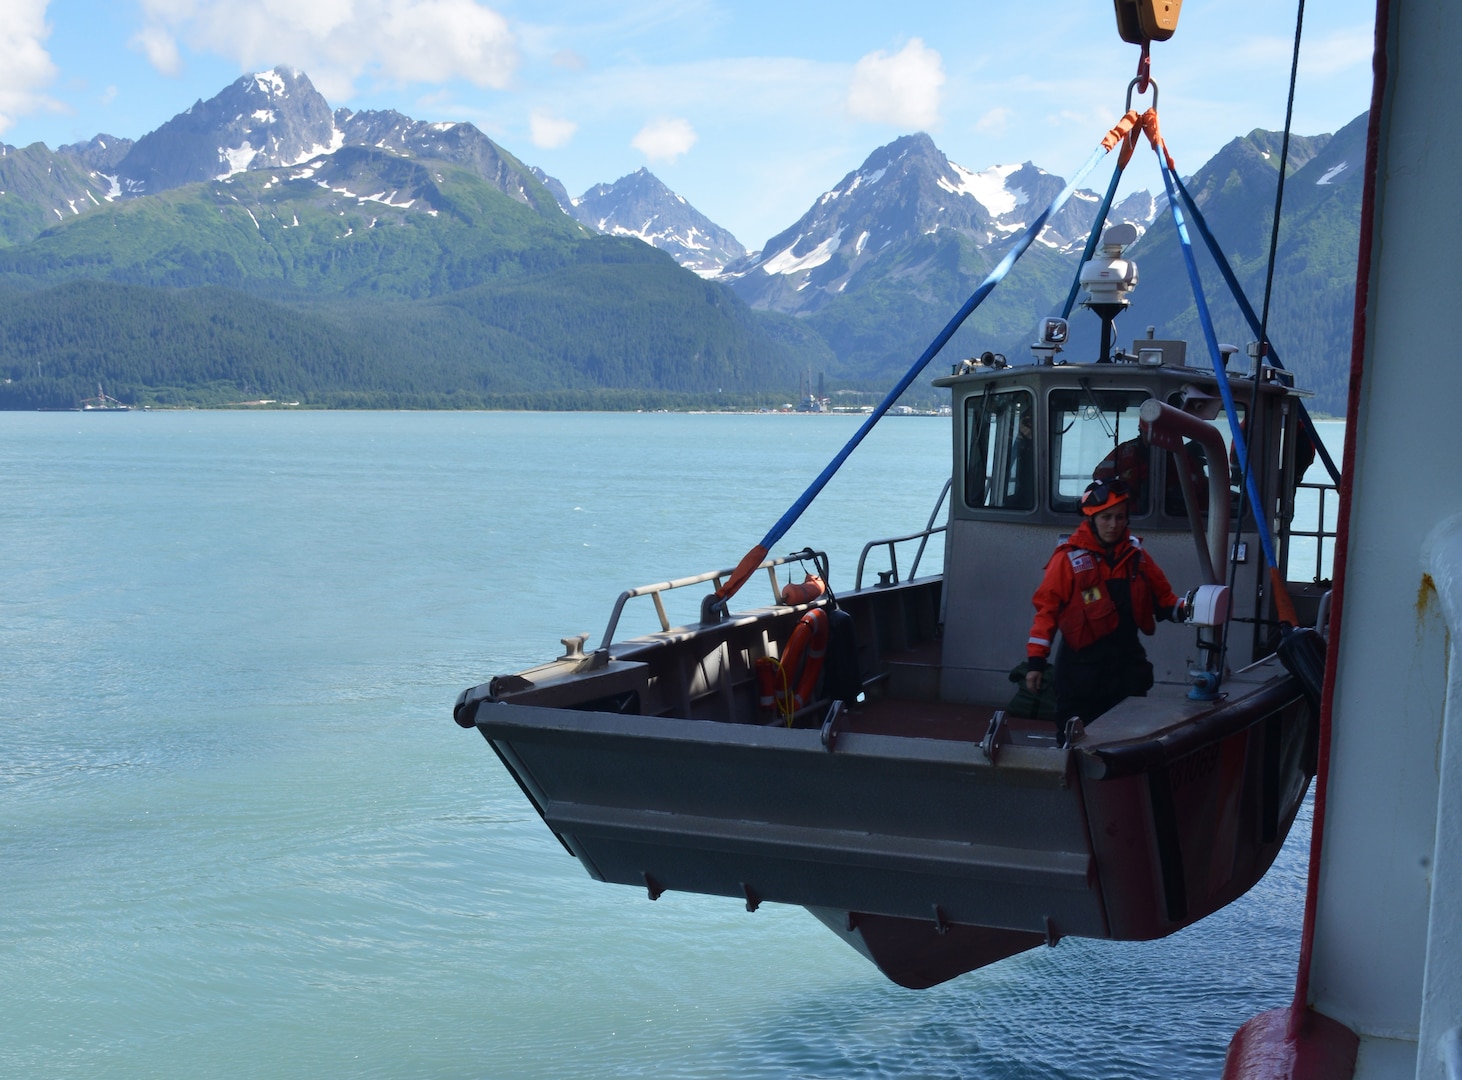 Petty Officer 3rd Class Danielle Ray from the Coast Guard Cutter Healy is lowered into Resurrection Bay near Seward, Alaska, July 21, 2017. Small boats aboard Healy are used as platforms for missions that include dive operations, scientific research and ice operations. U.S. Coast Guard photo by Senior Chief Petty Officer Rachel Polish